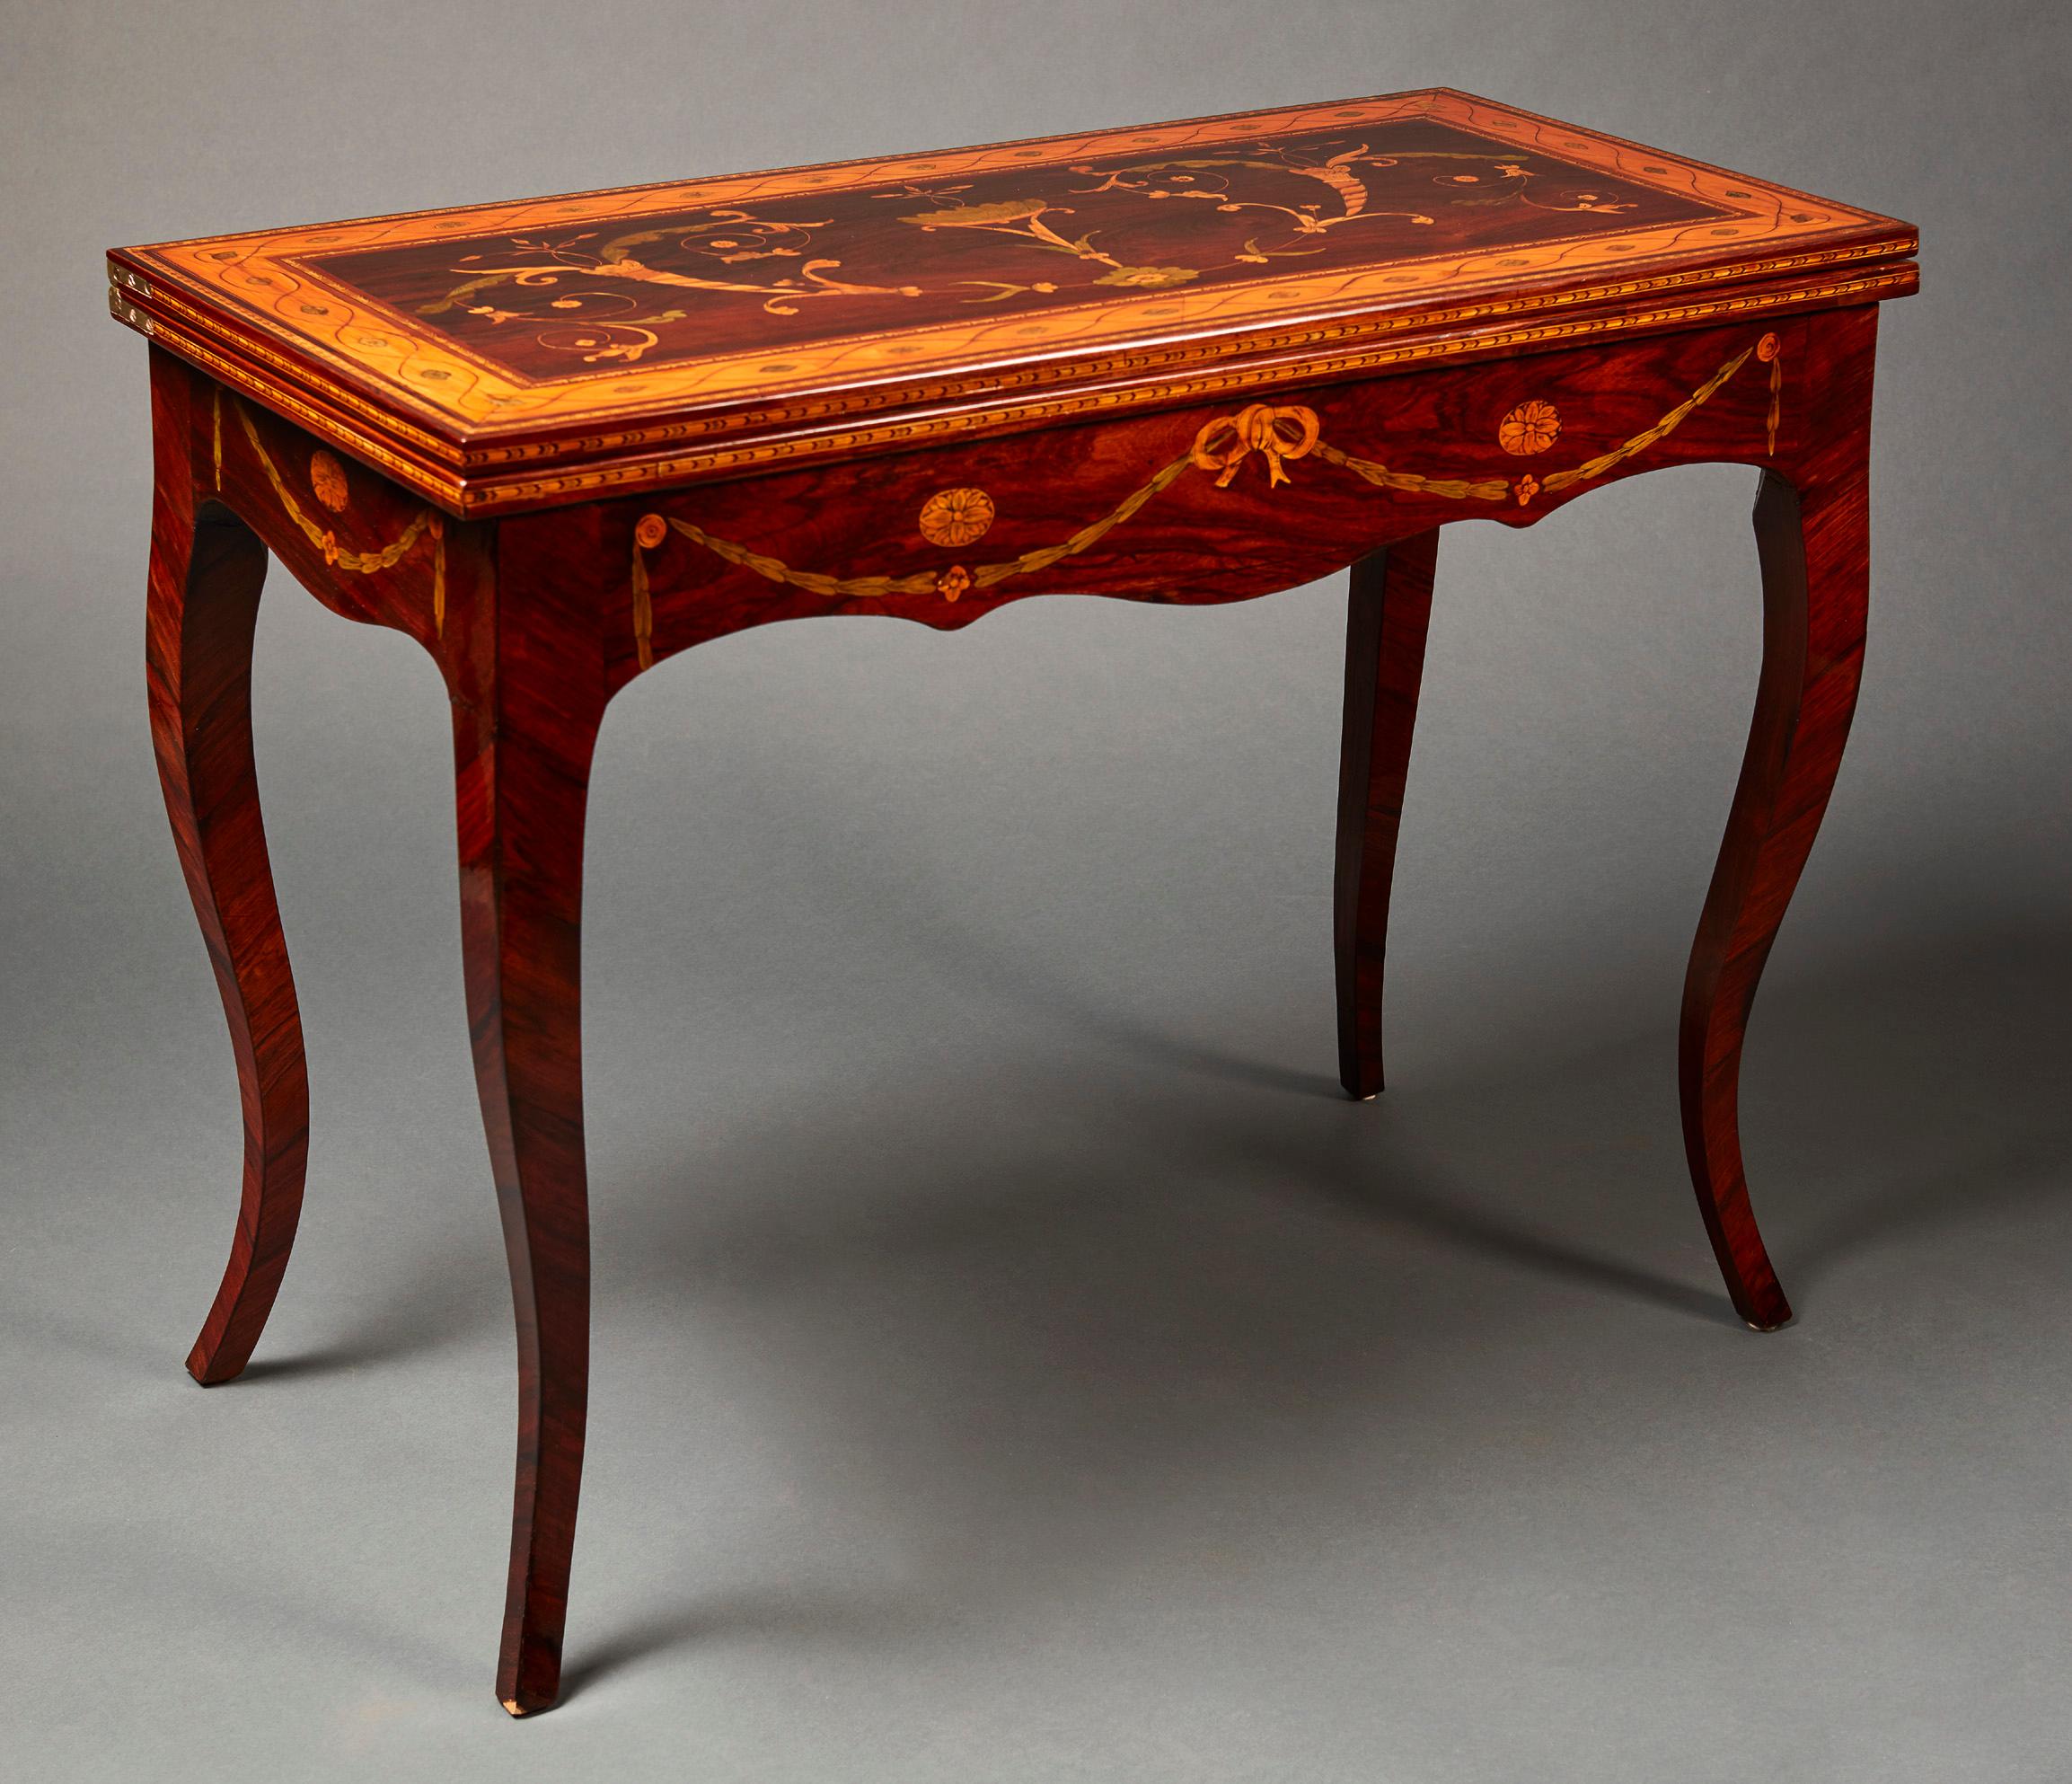 A fine neoclassical Russian fruitwood marquetry and parquetry games table from the late 18th century, probably Saint Petersburg. With a rectangular rotating and folding top, decorated with elaborate rinceaux scrolling foliage, opening to a